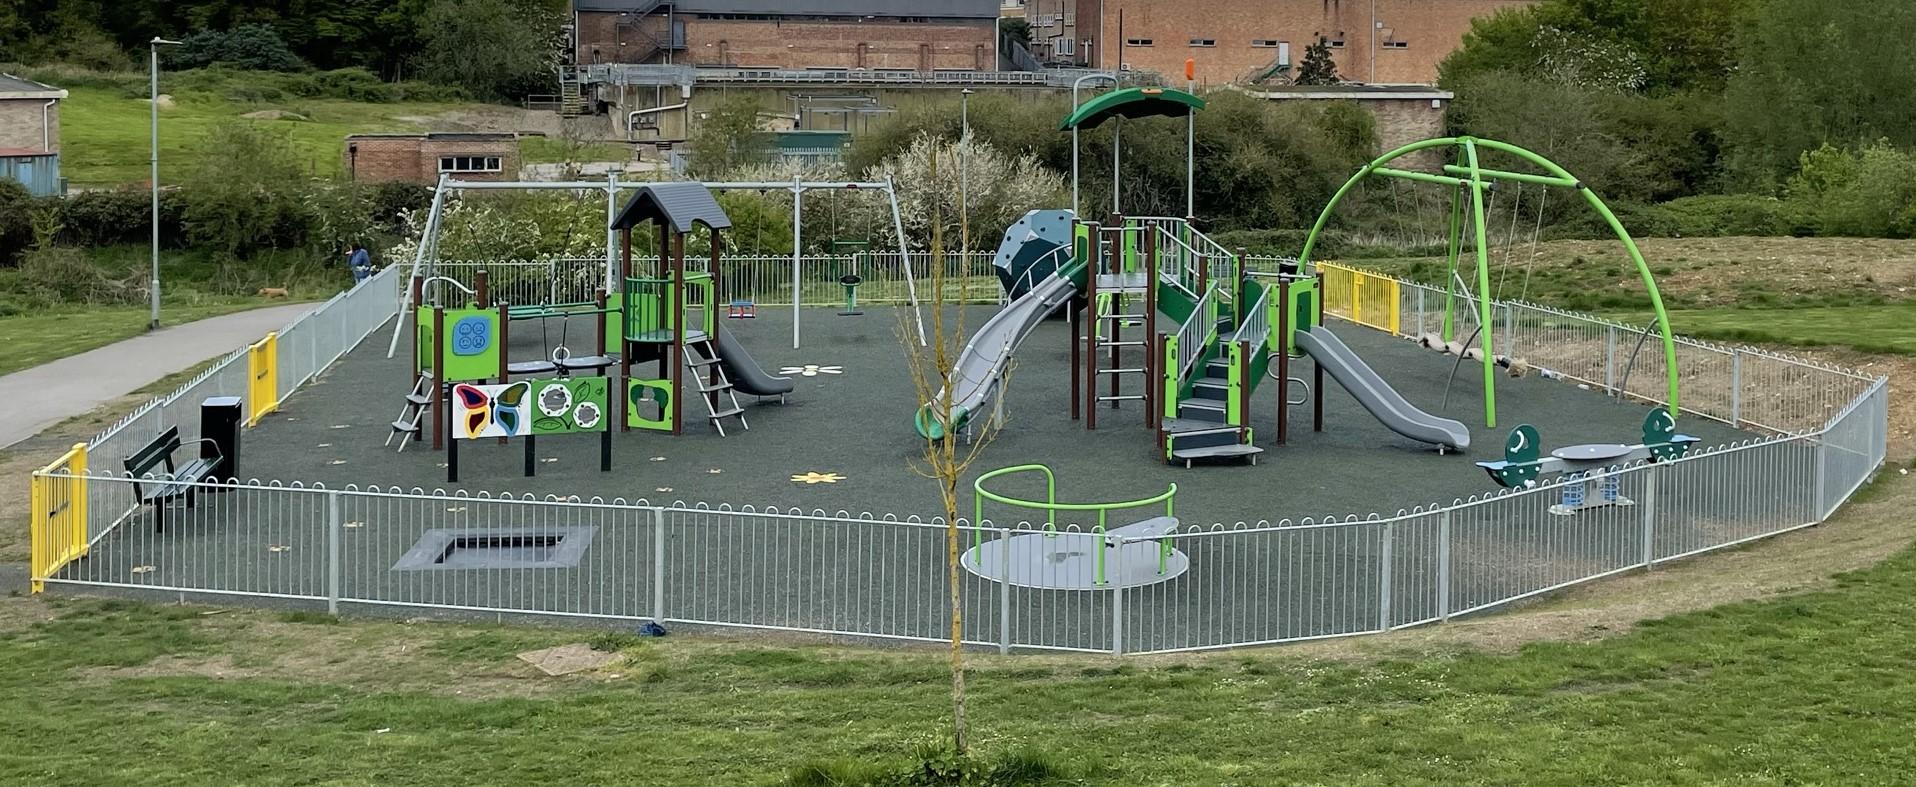 image shows play area equipment located at mill park drive in braintree